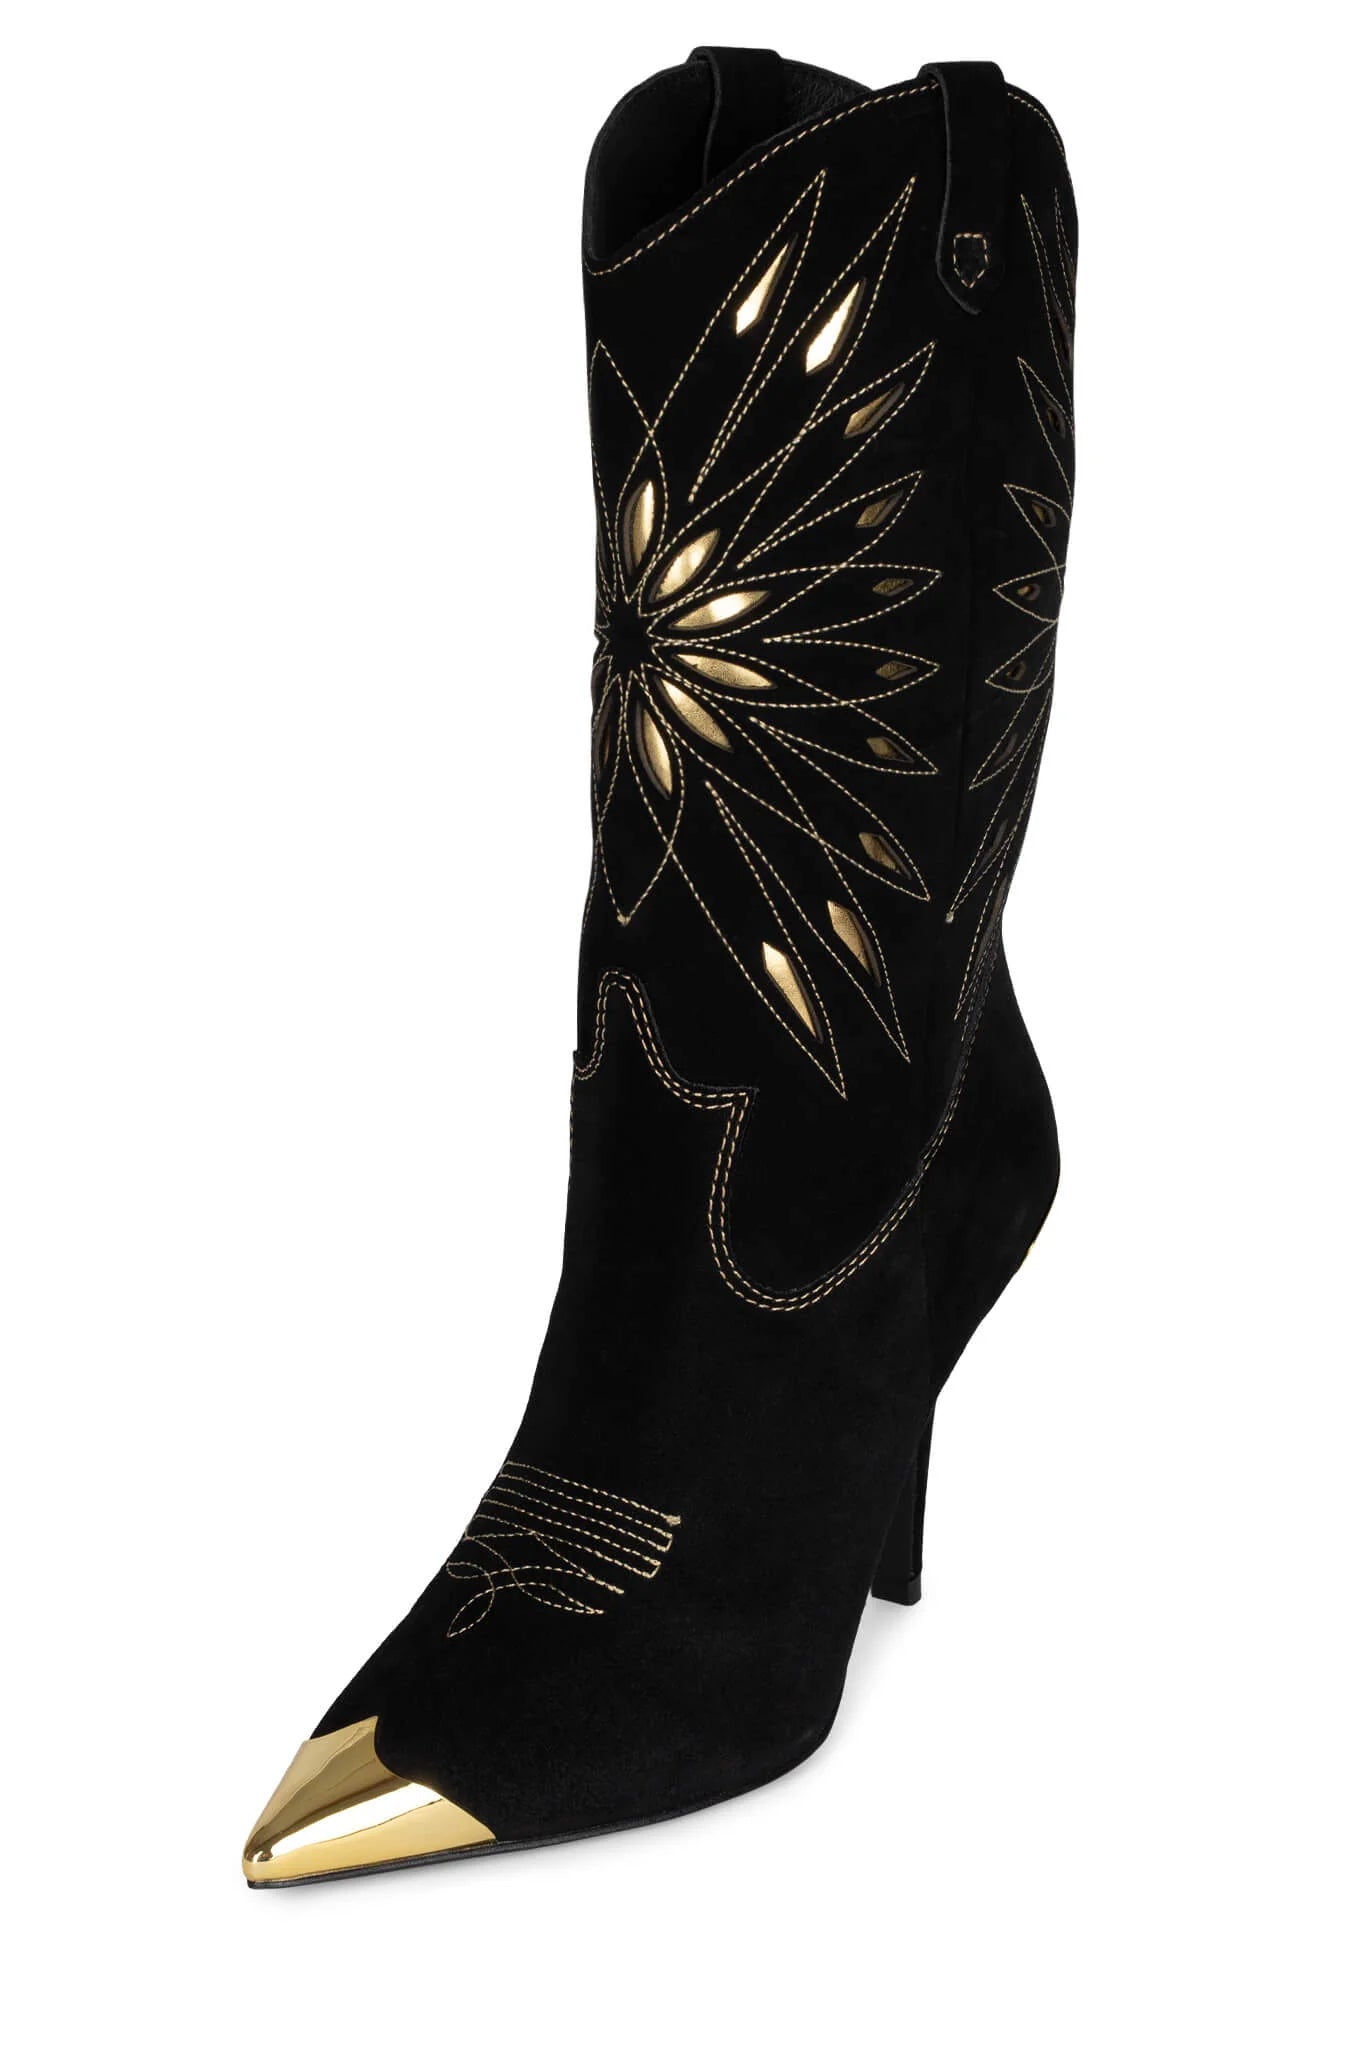 JEFFREY CAMPBELL PASO BOOTS - GOLD